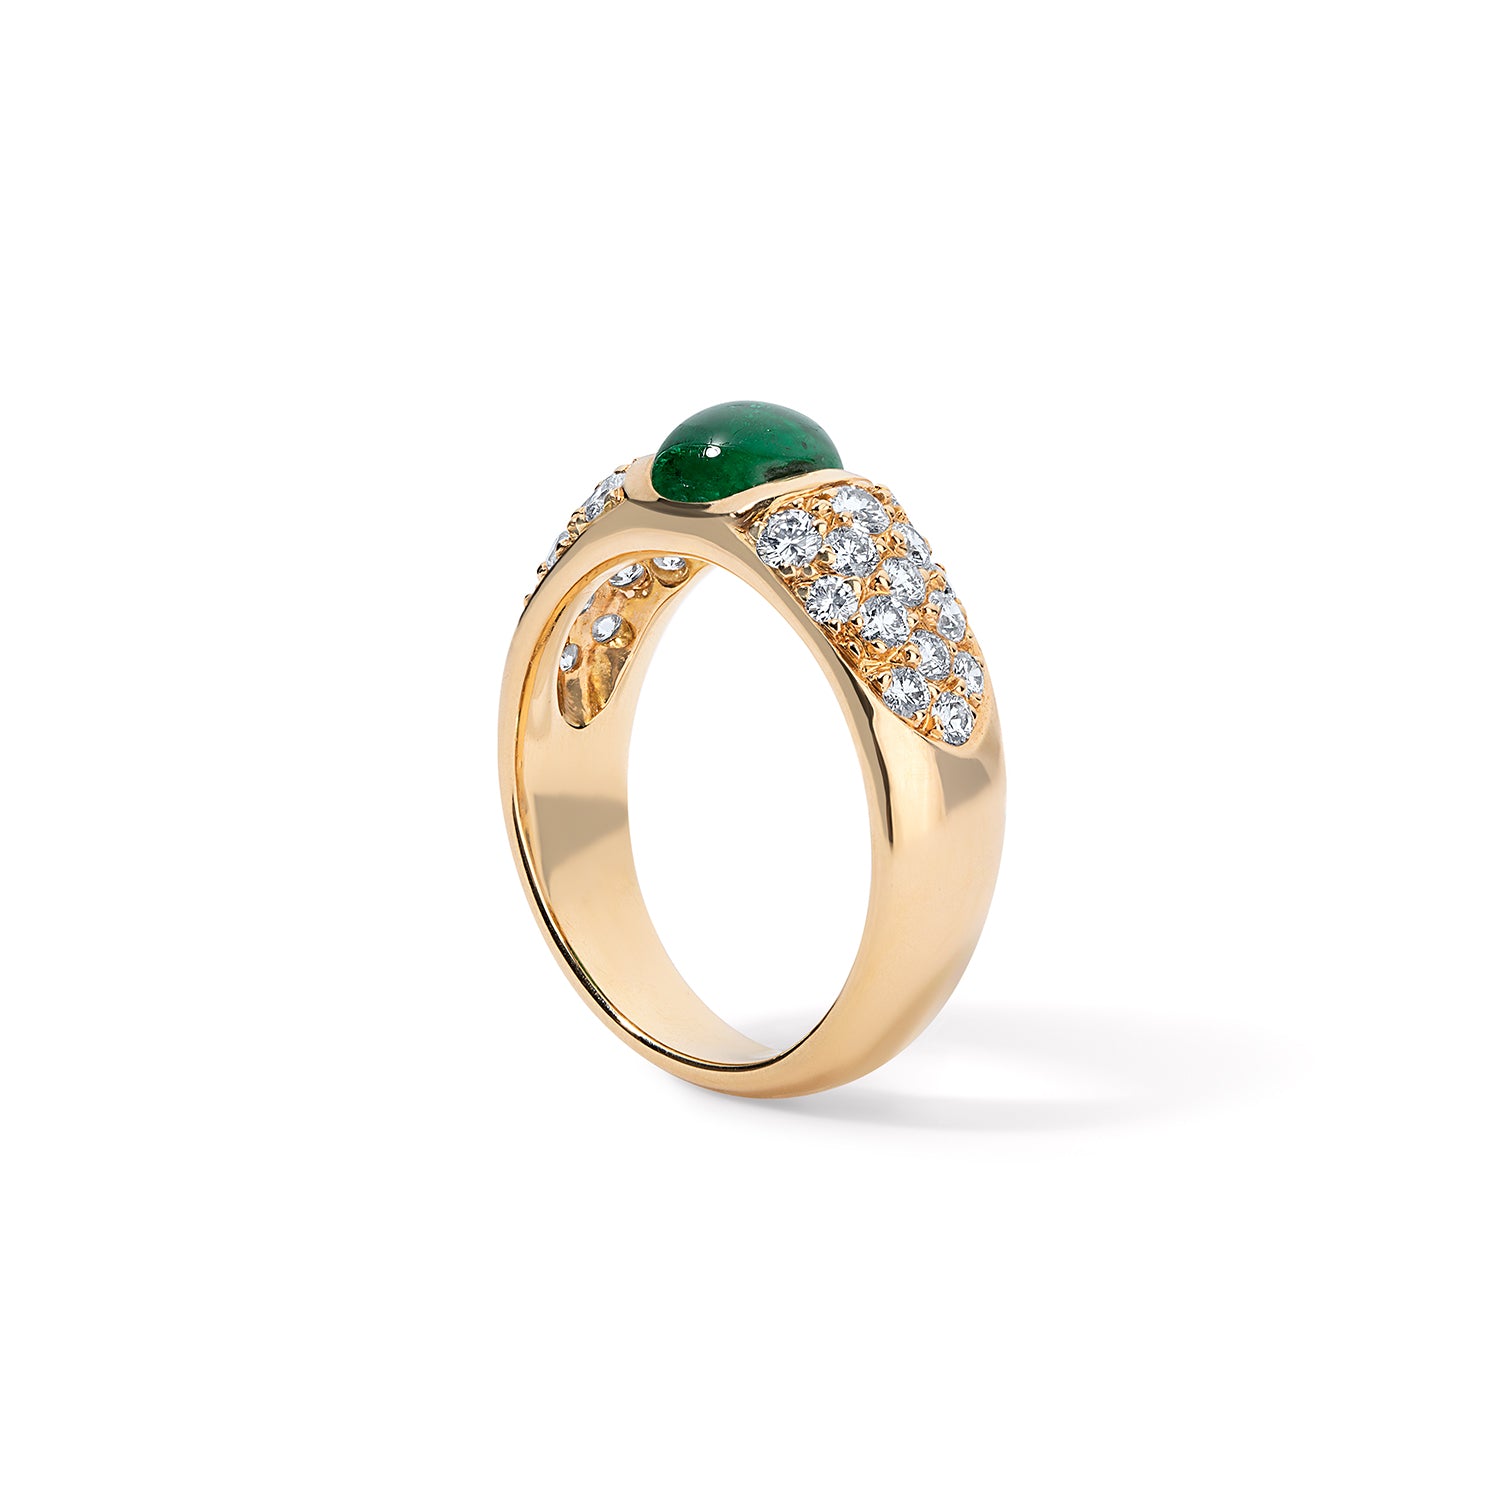 Vintage Cabochon Emerald and Diamond Ring